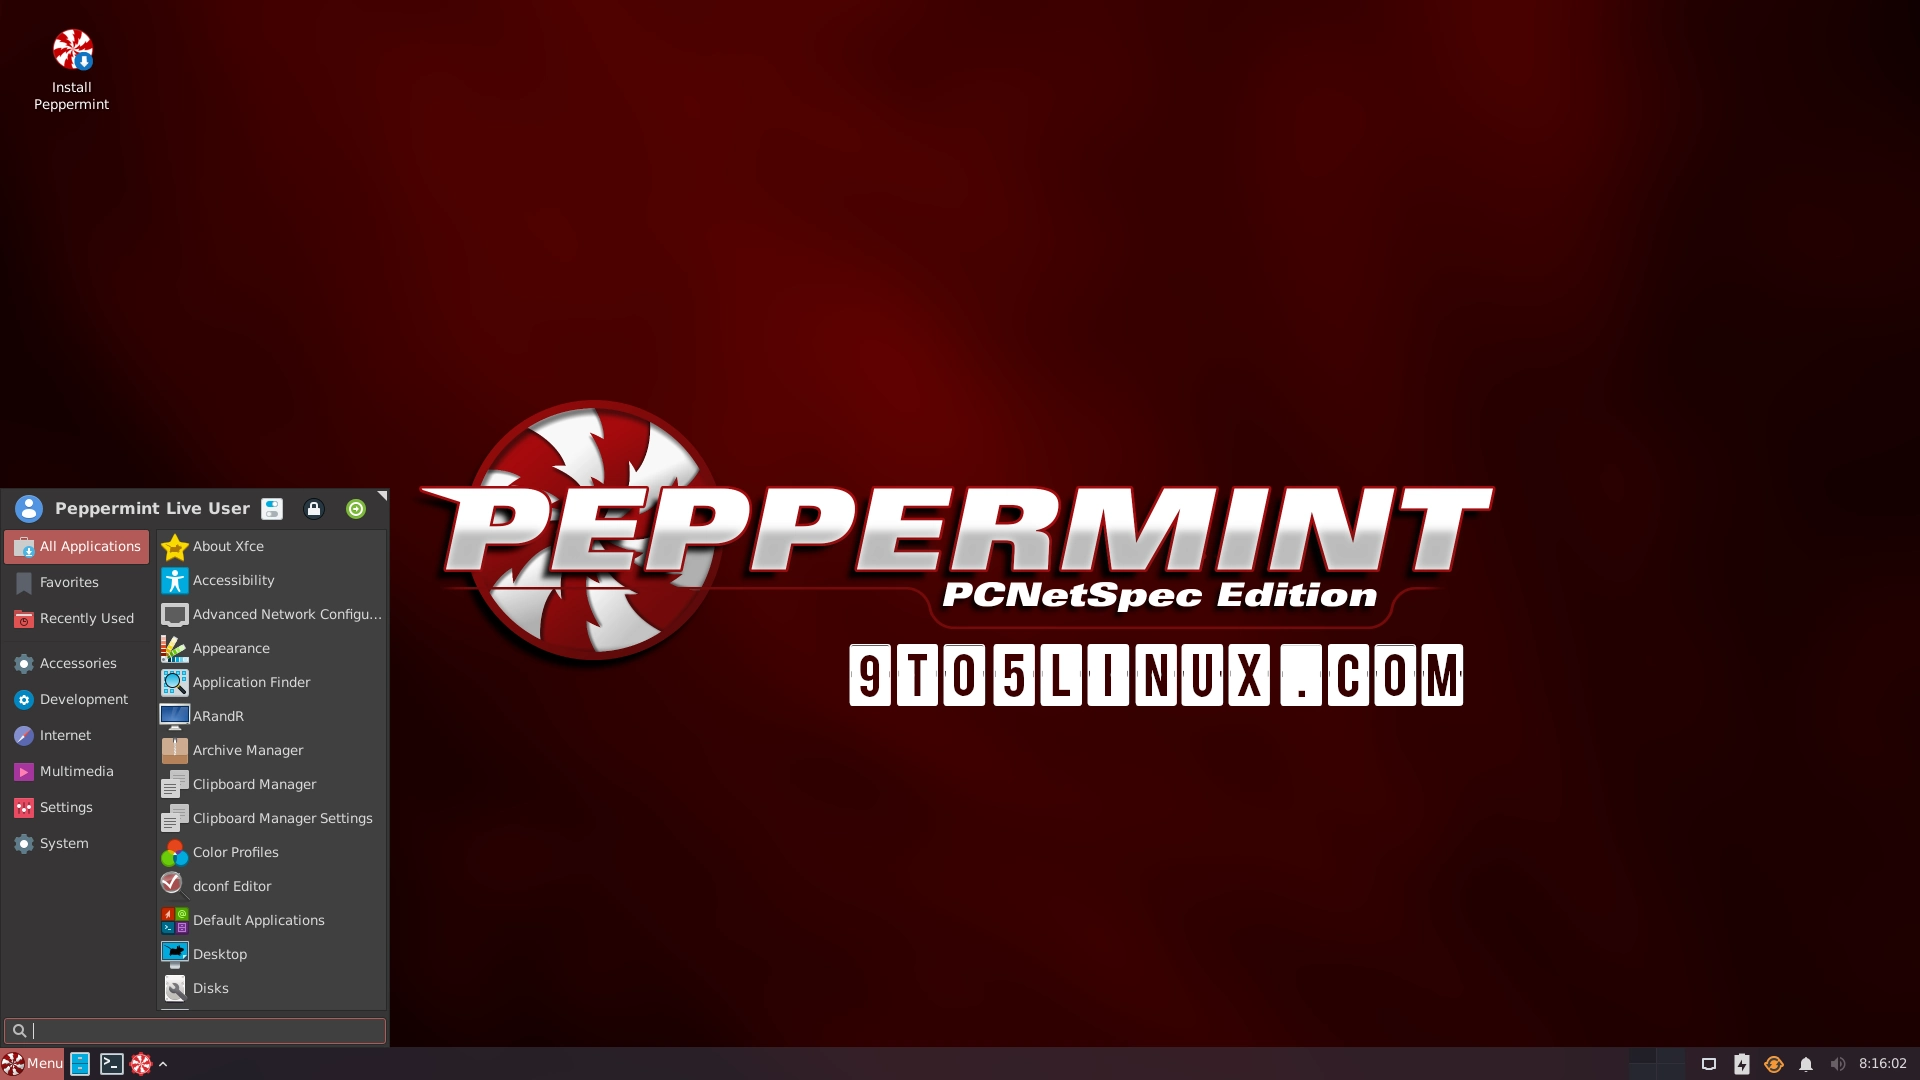 Peppermint OS 11 Released After 3 Years in Development, Now Based on Debian and Xfce